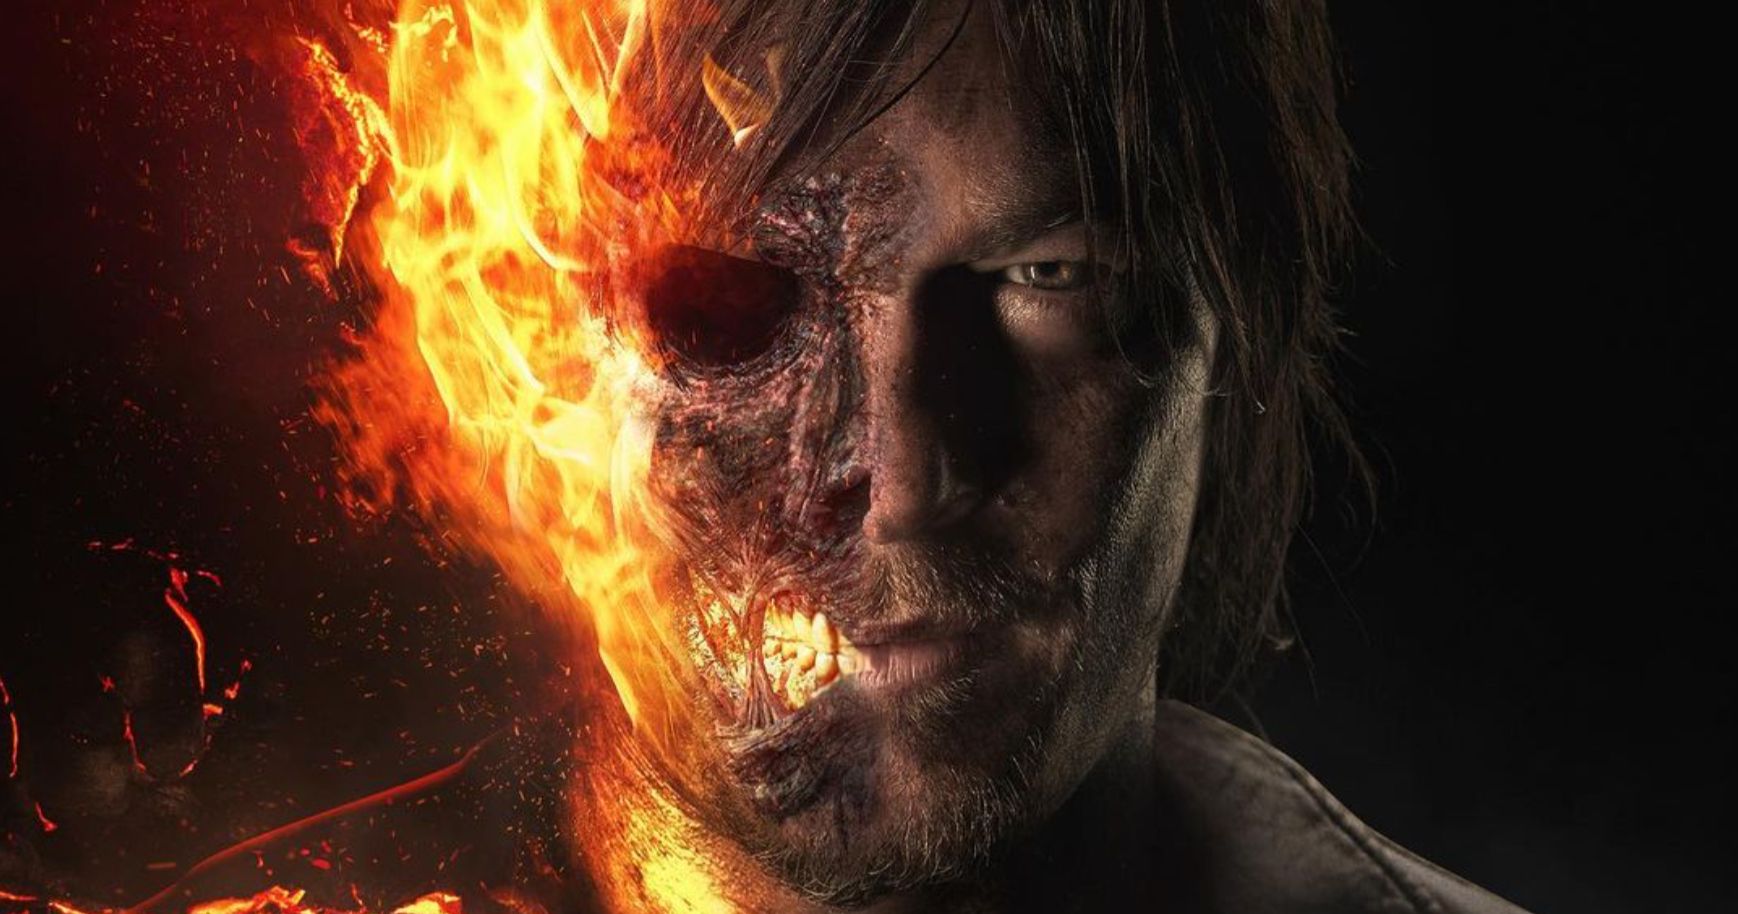 Norman Reedus Is Johnny Blaze in New MCU Fan Art After Lobbying for Ghost Rider Role